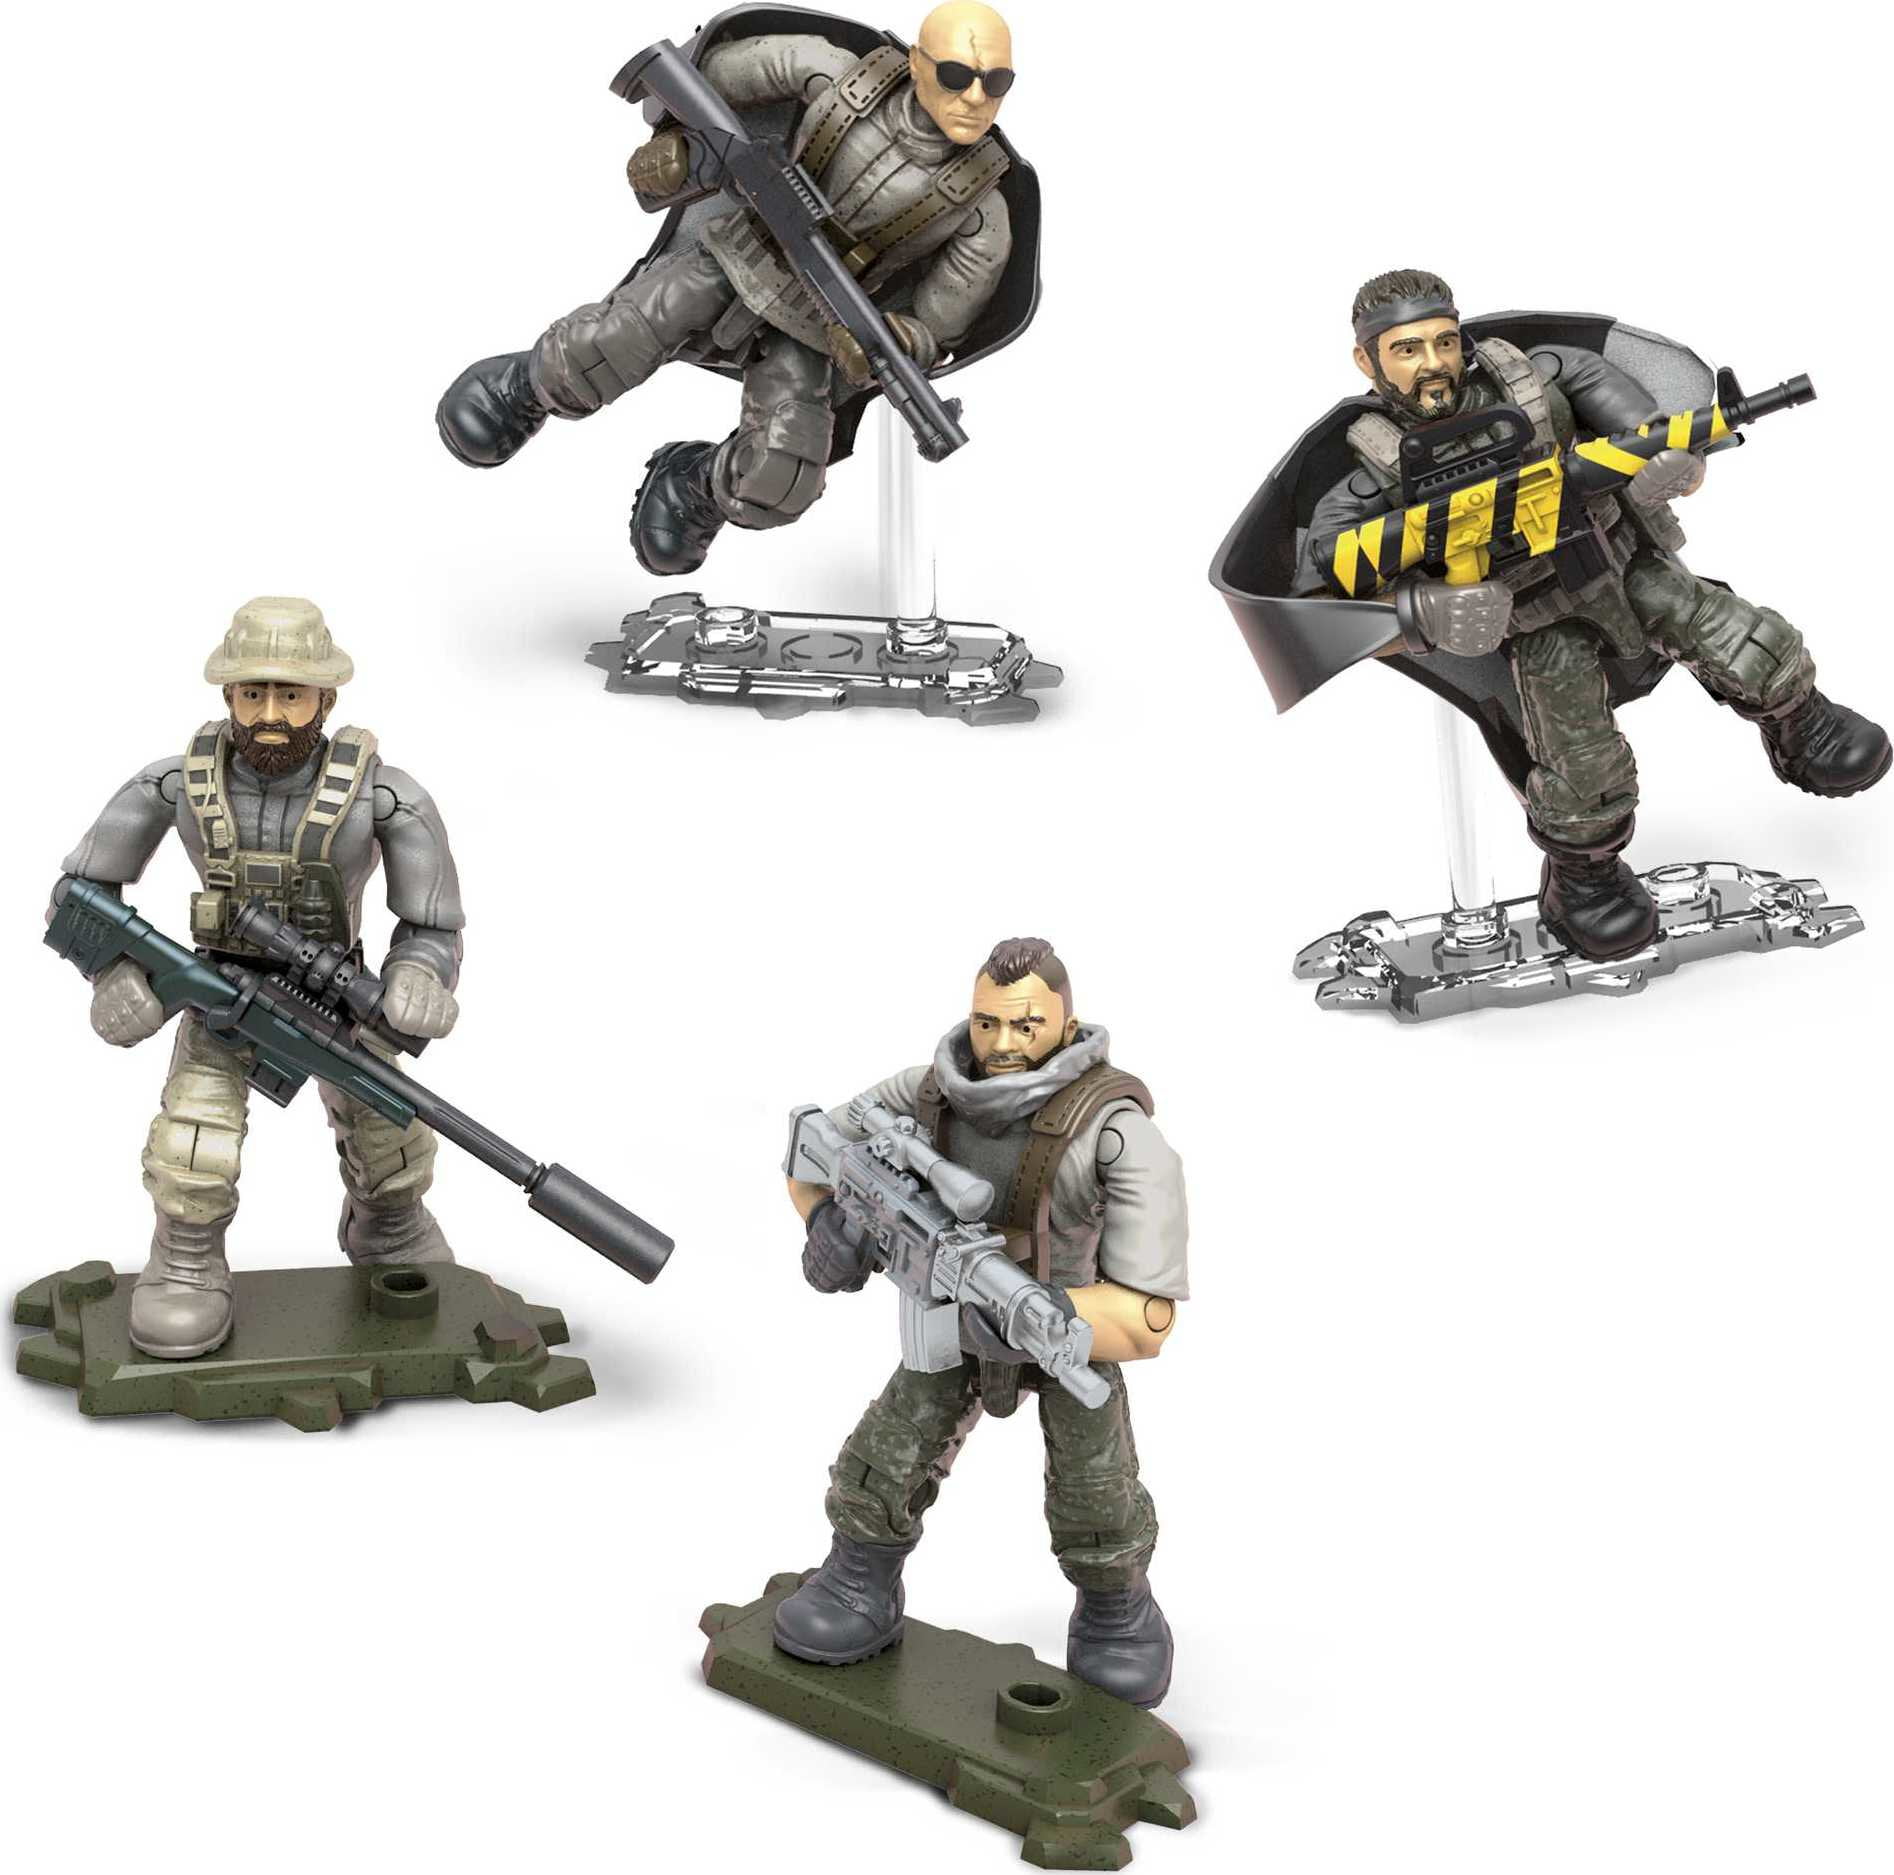 Call of duty Ghosts Black Ops Soldiers PS4 Xbox Mini Figures lego size World war 